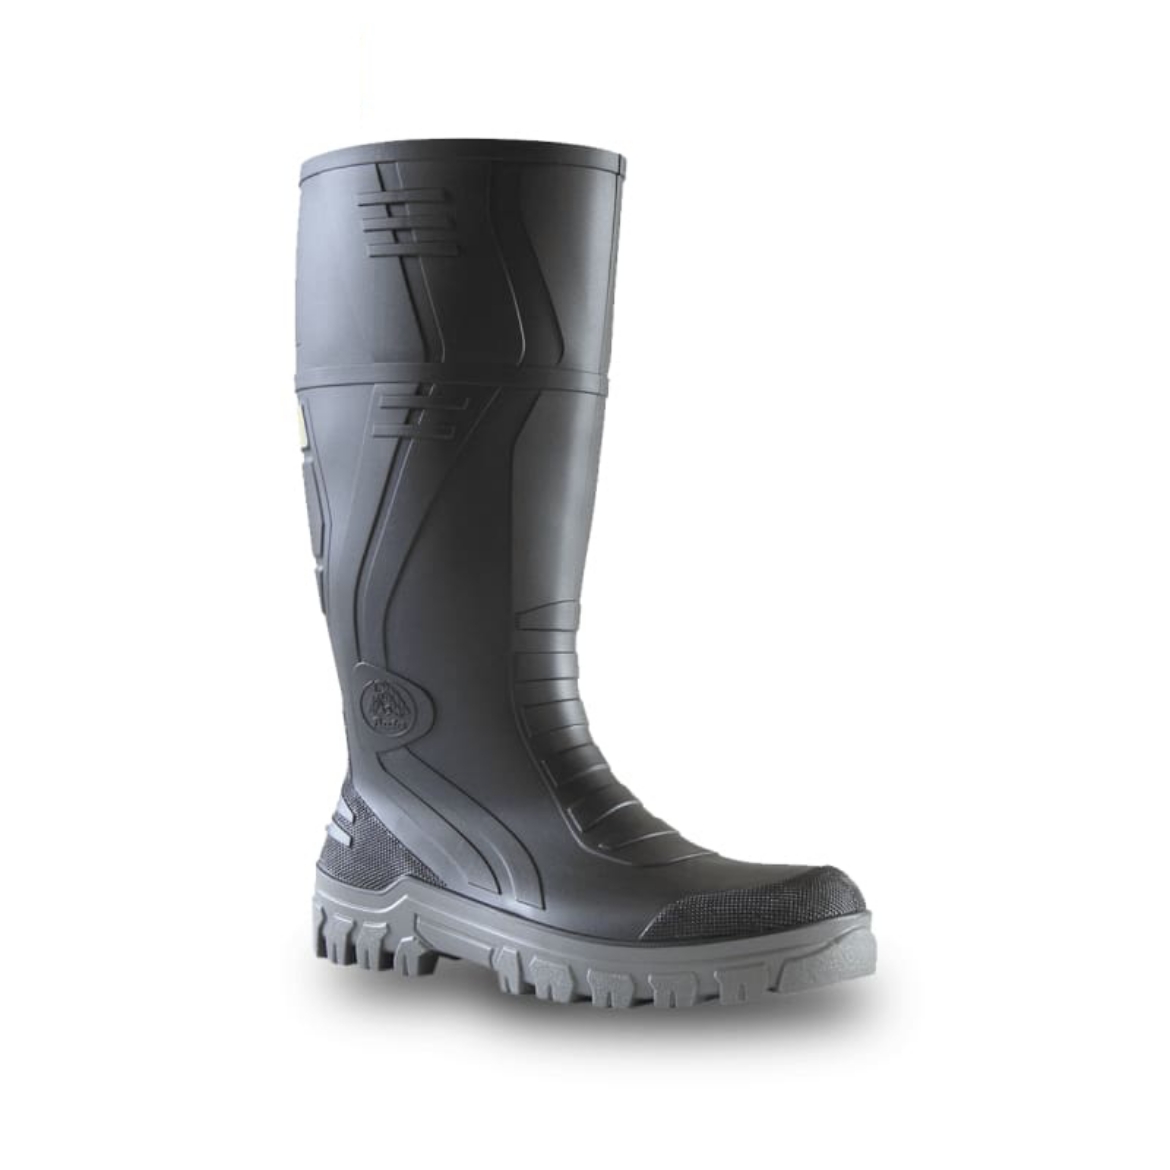 Picture of Bata Industrials, Jobmaster 3, Safety Toe Midsole Boot, PVC 400mm,